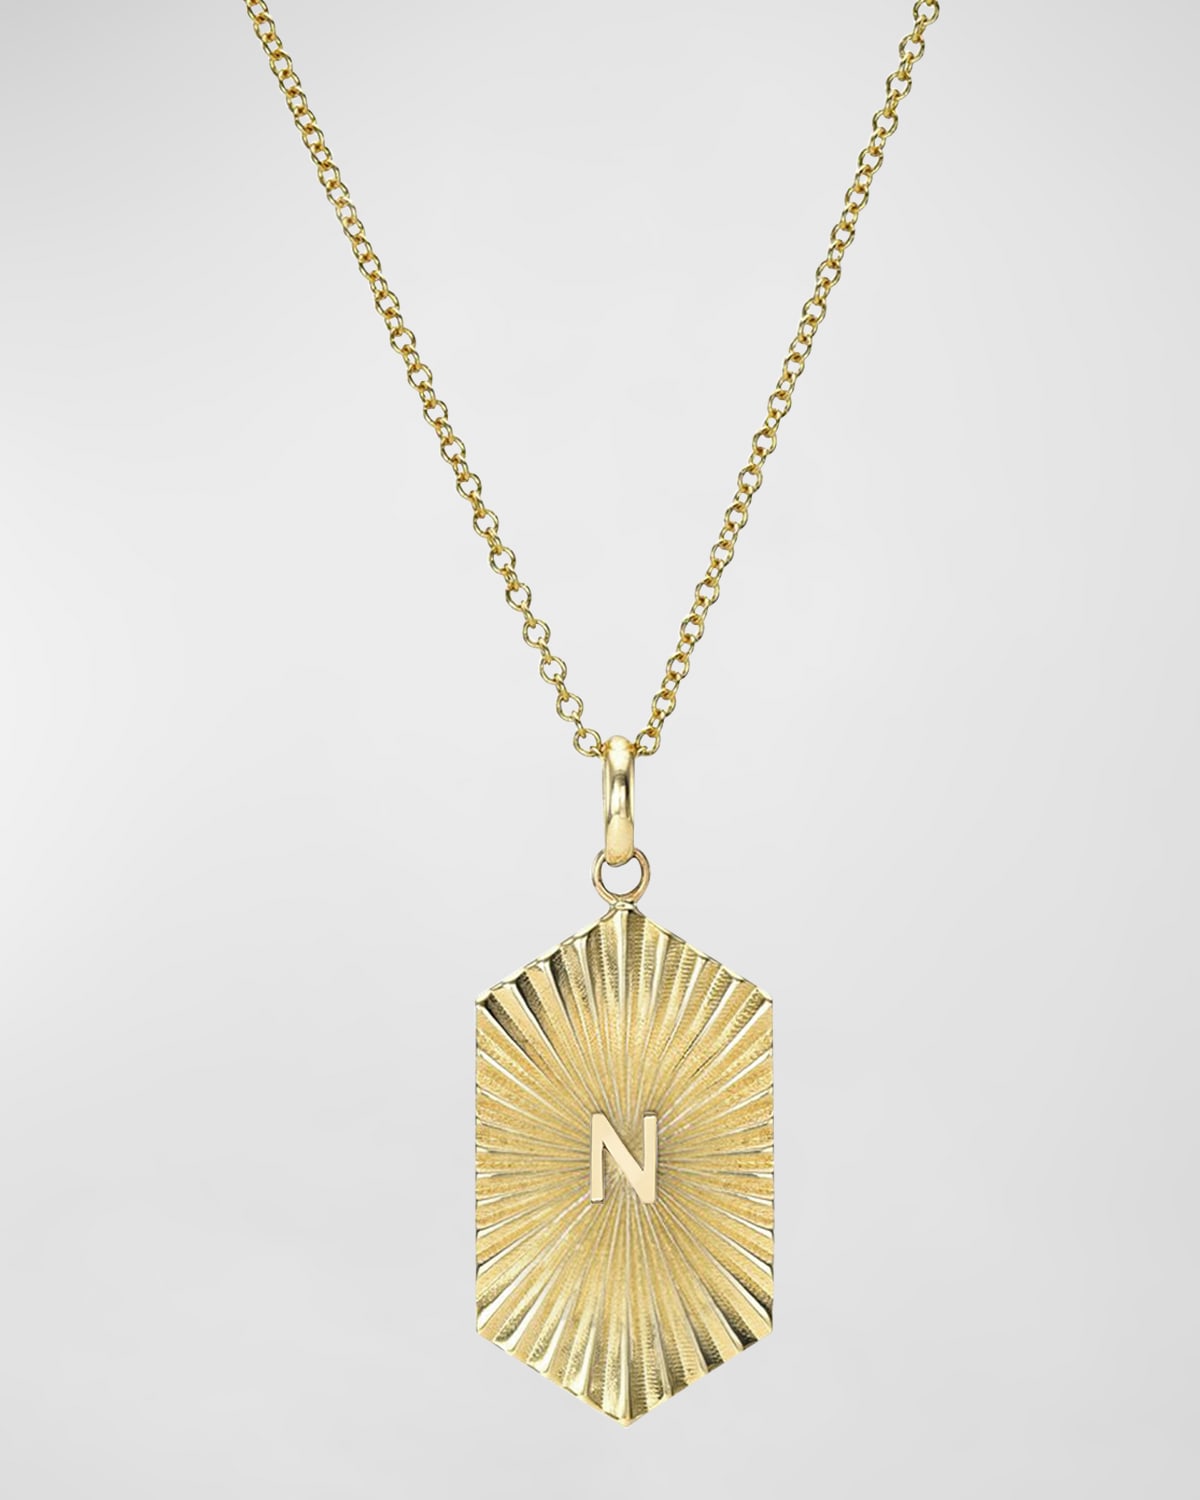 Zoe Lev Jewelry 14k Gold Pleated Shield With Initial Necklace